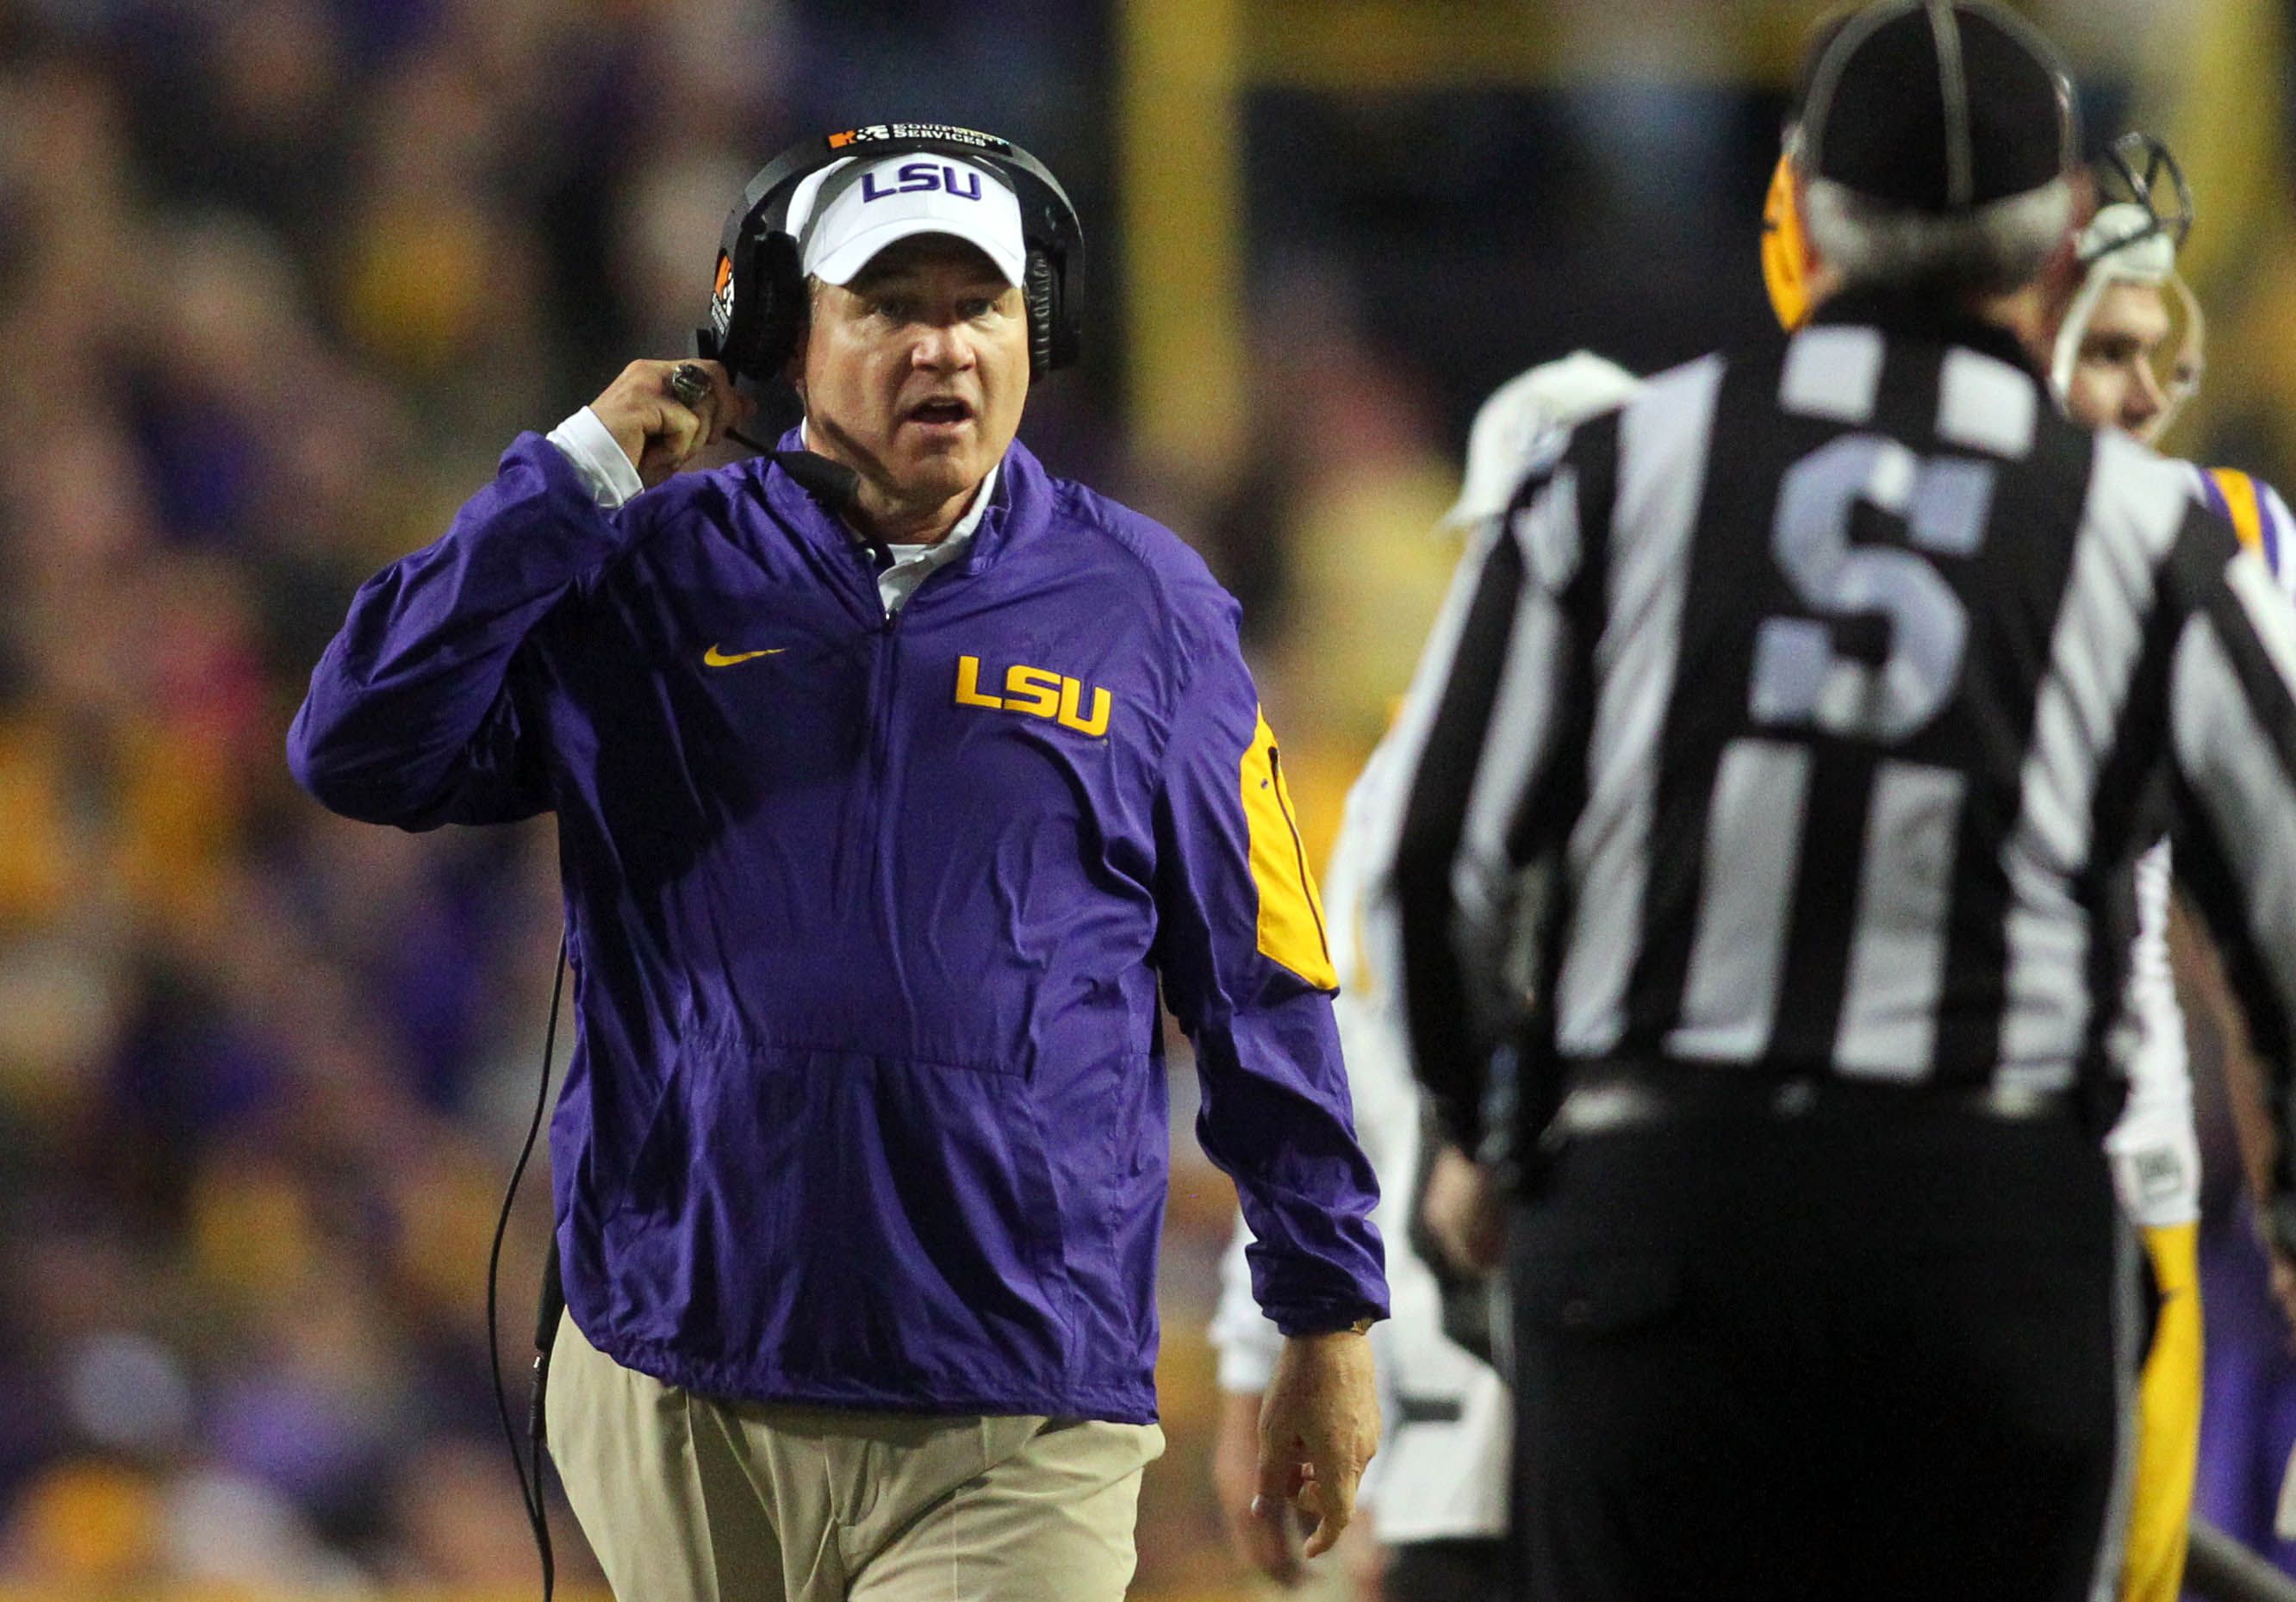 Is it fair for LSU to fire coach Les Miles? | USA TODAY Sports